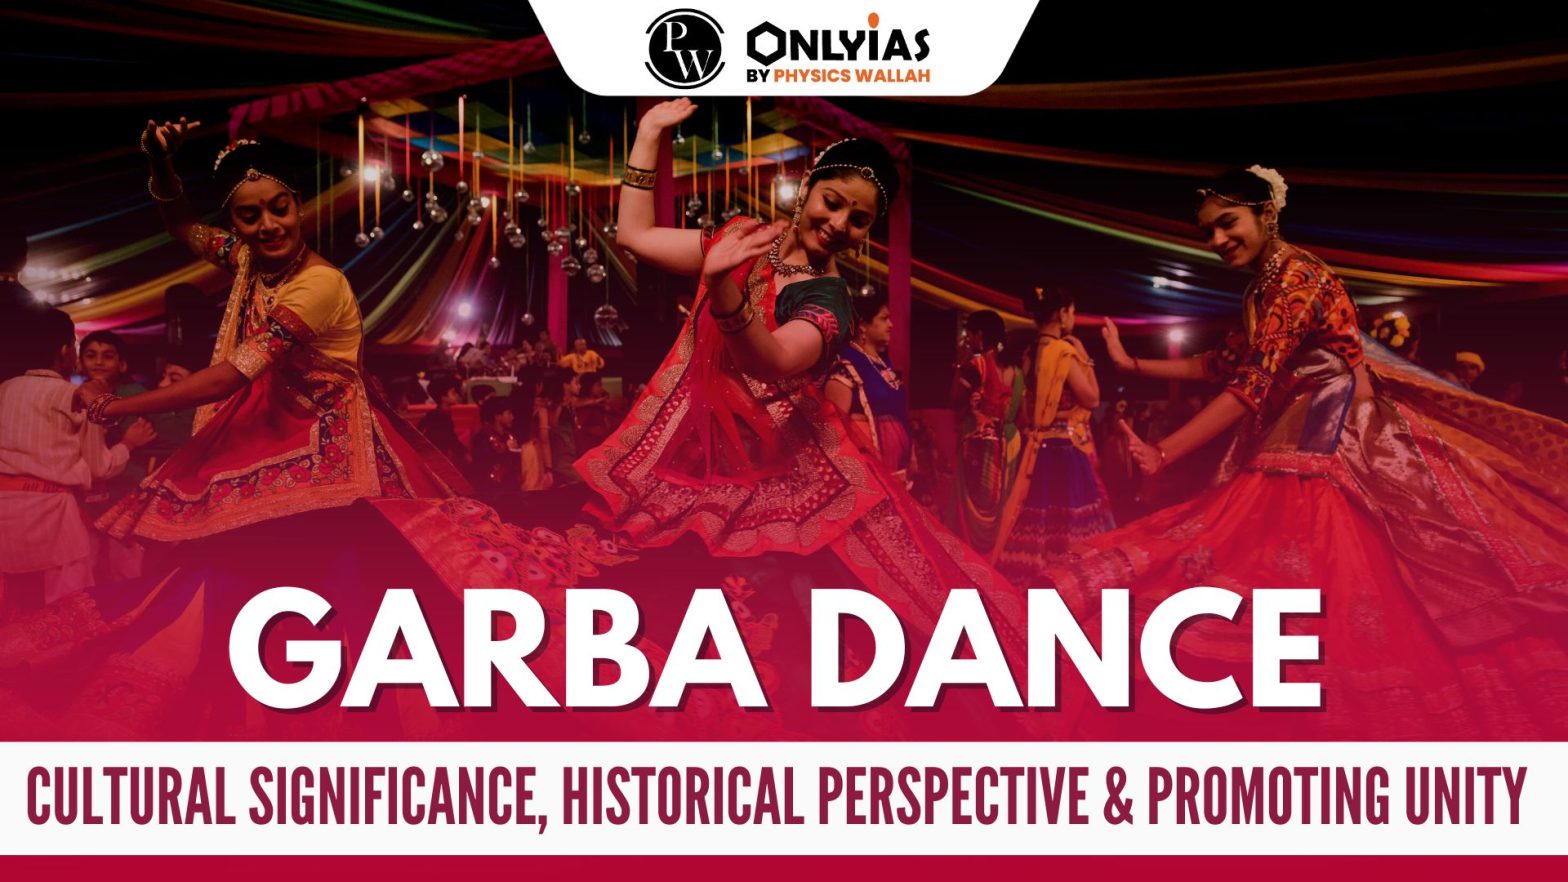 Garba Dance: Cultural Significance, Historical Perspective & Promoting Unity